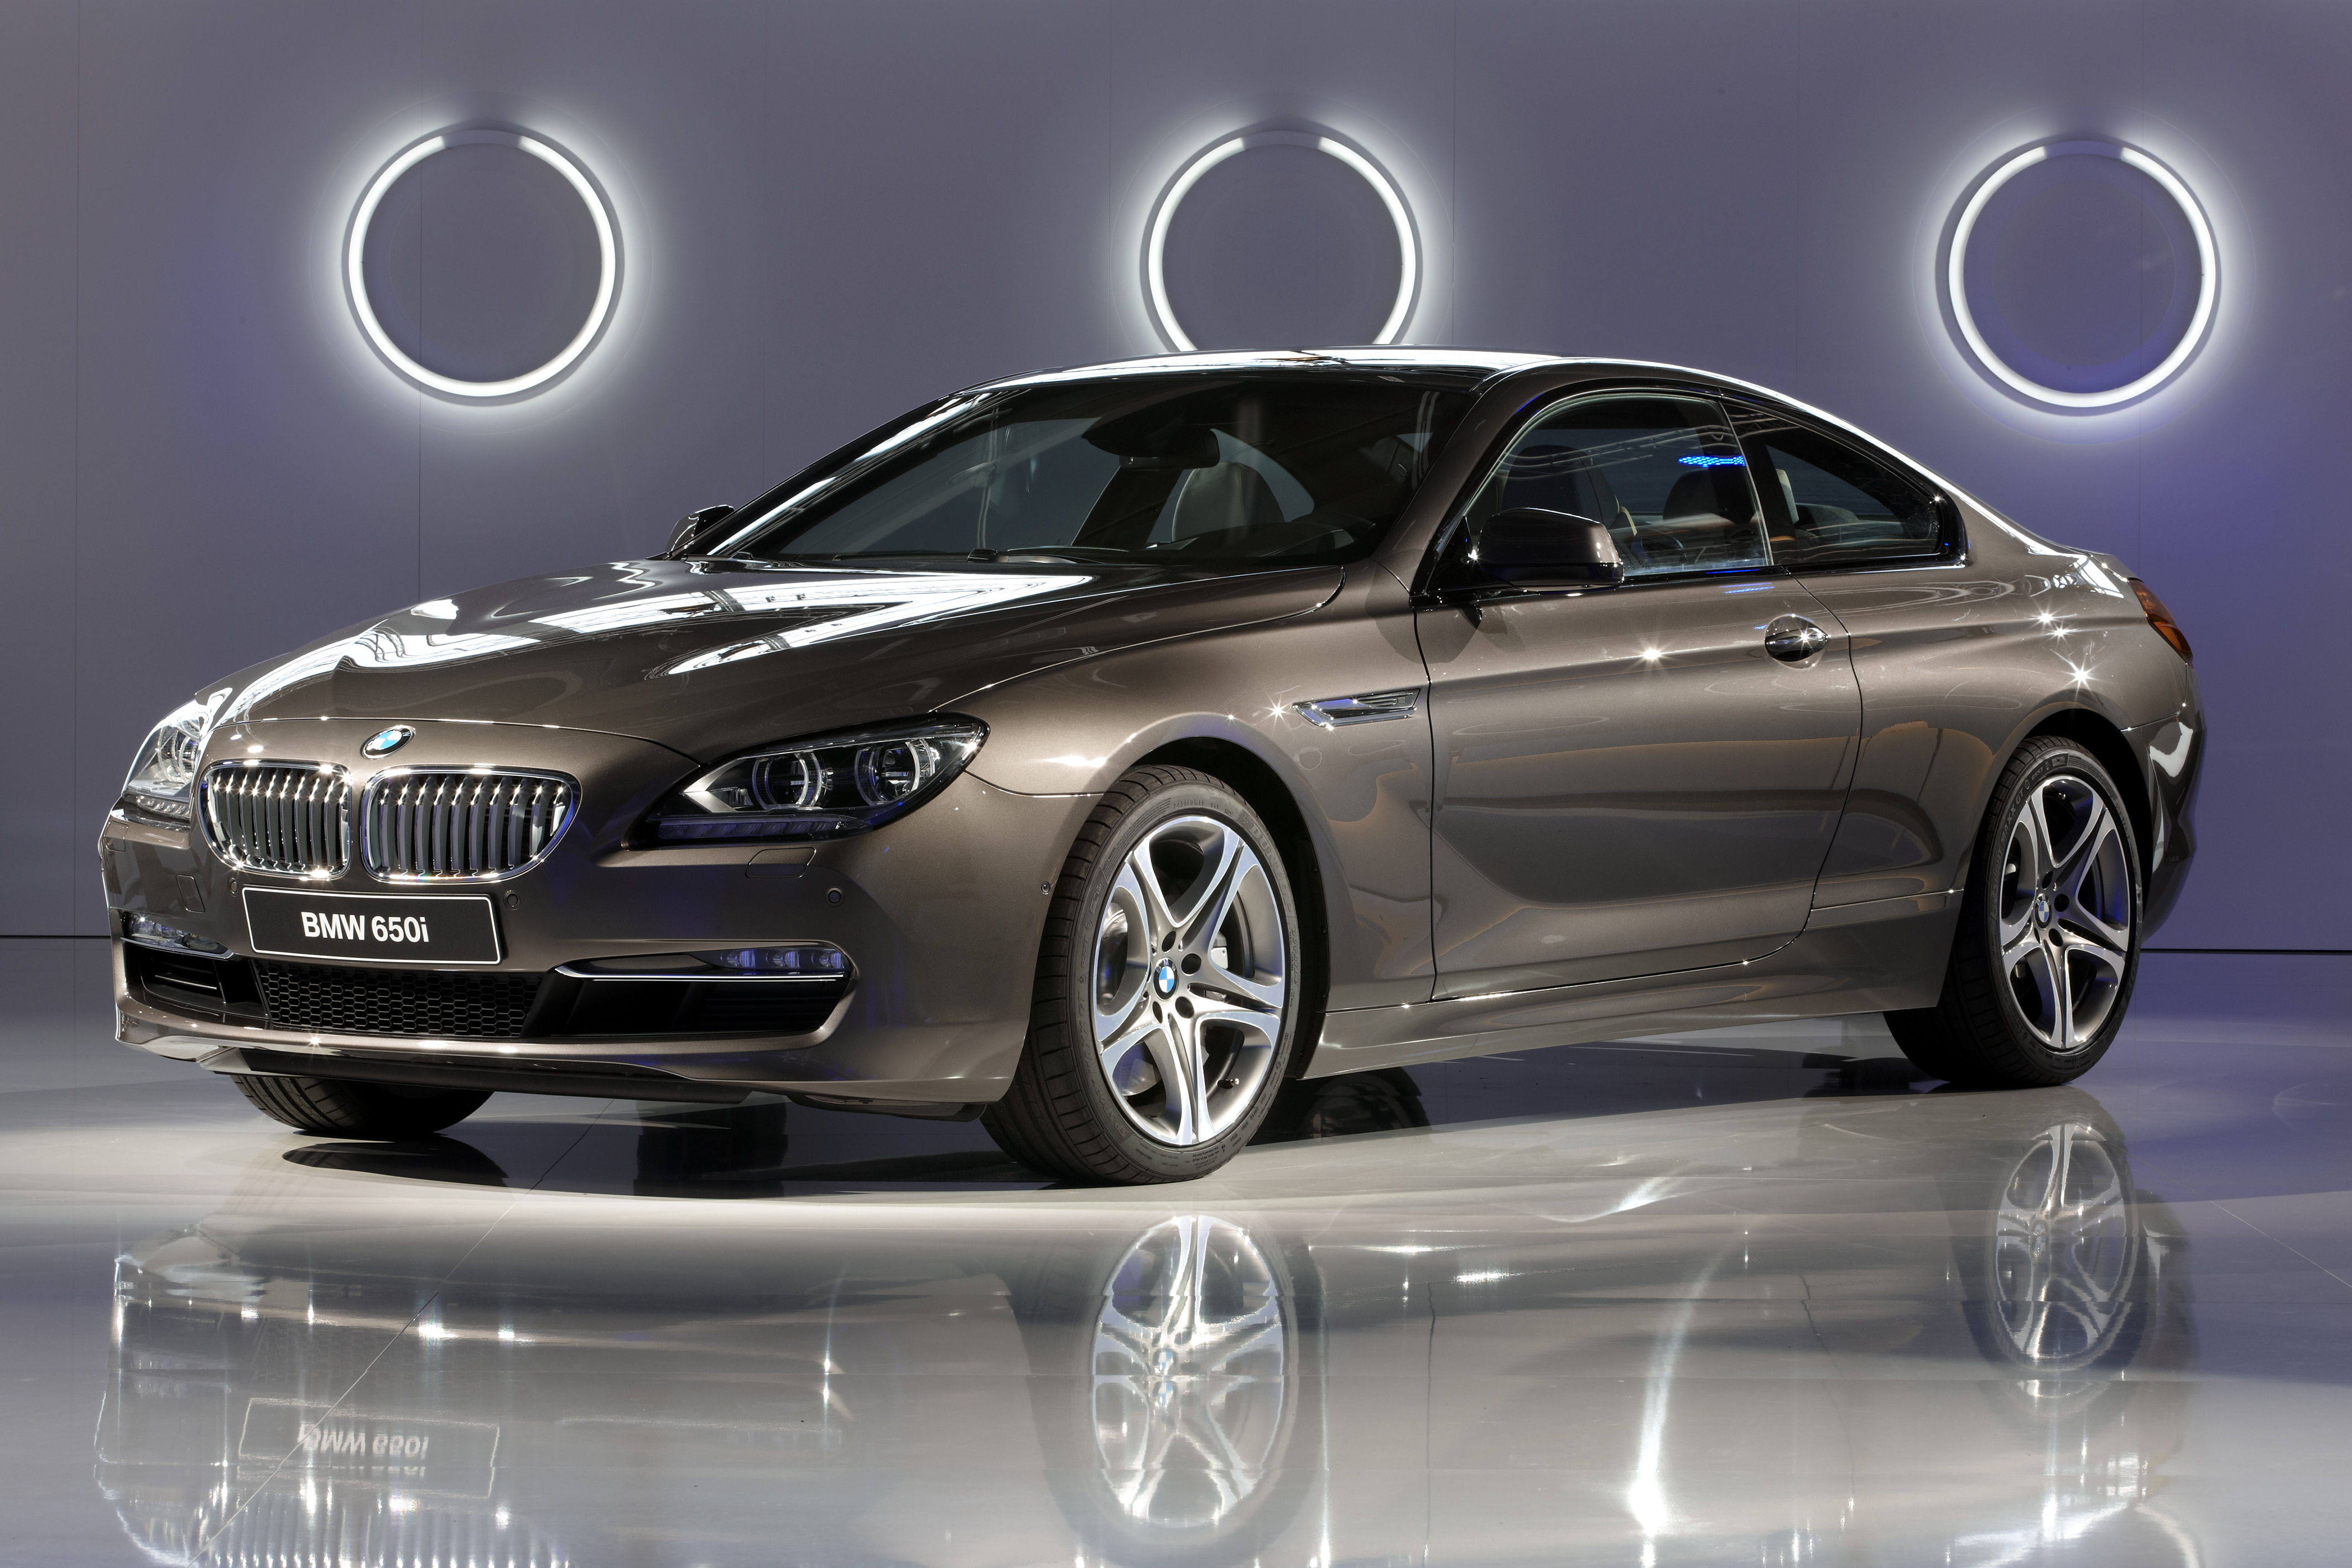 2012 BMW 6 Series receives the xDrive system and new 313HP Diesel Engine